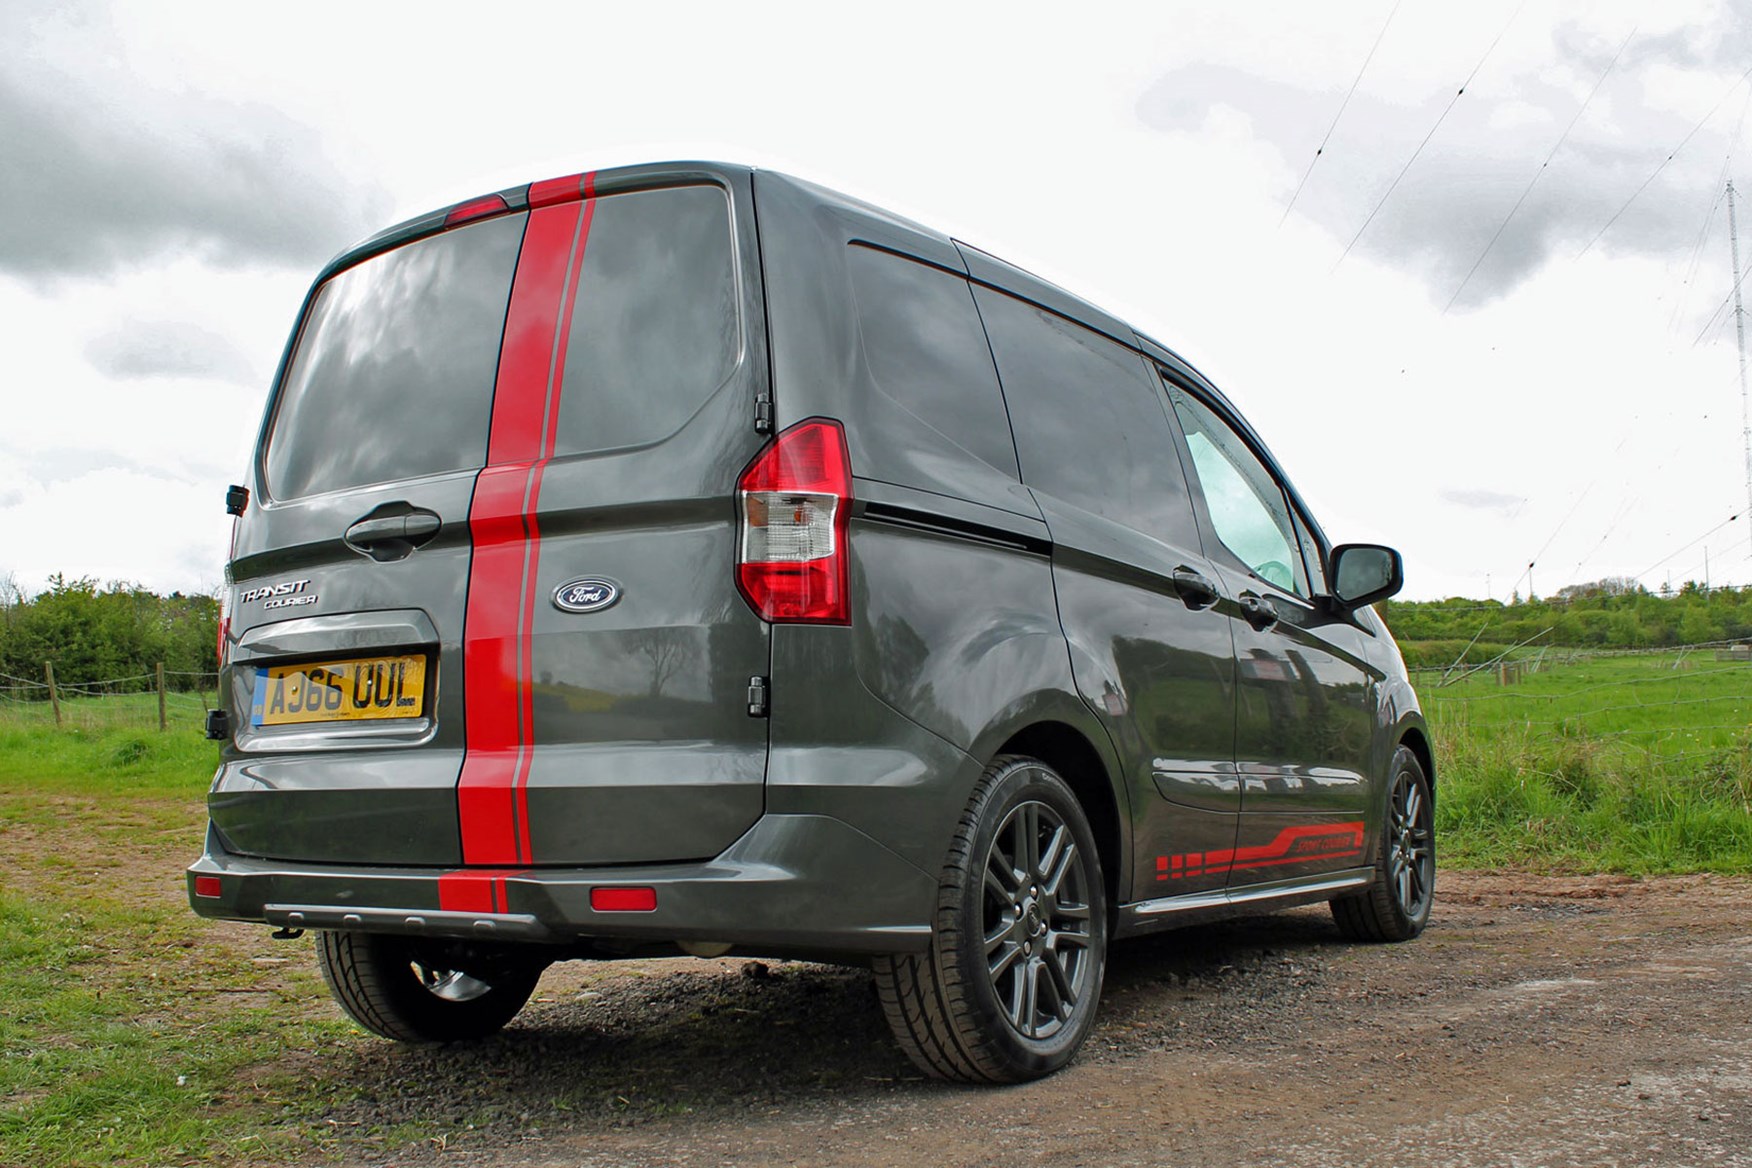 Ford Transit Courier Sport review - 1.6-litre 95hp model, rear view